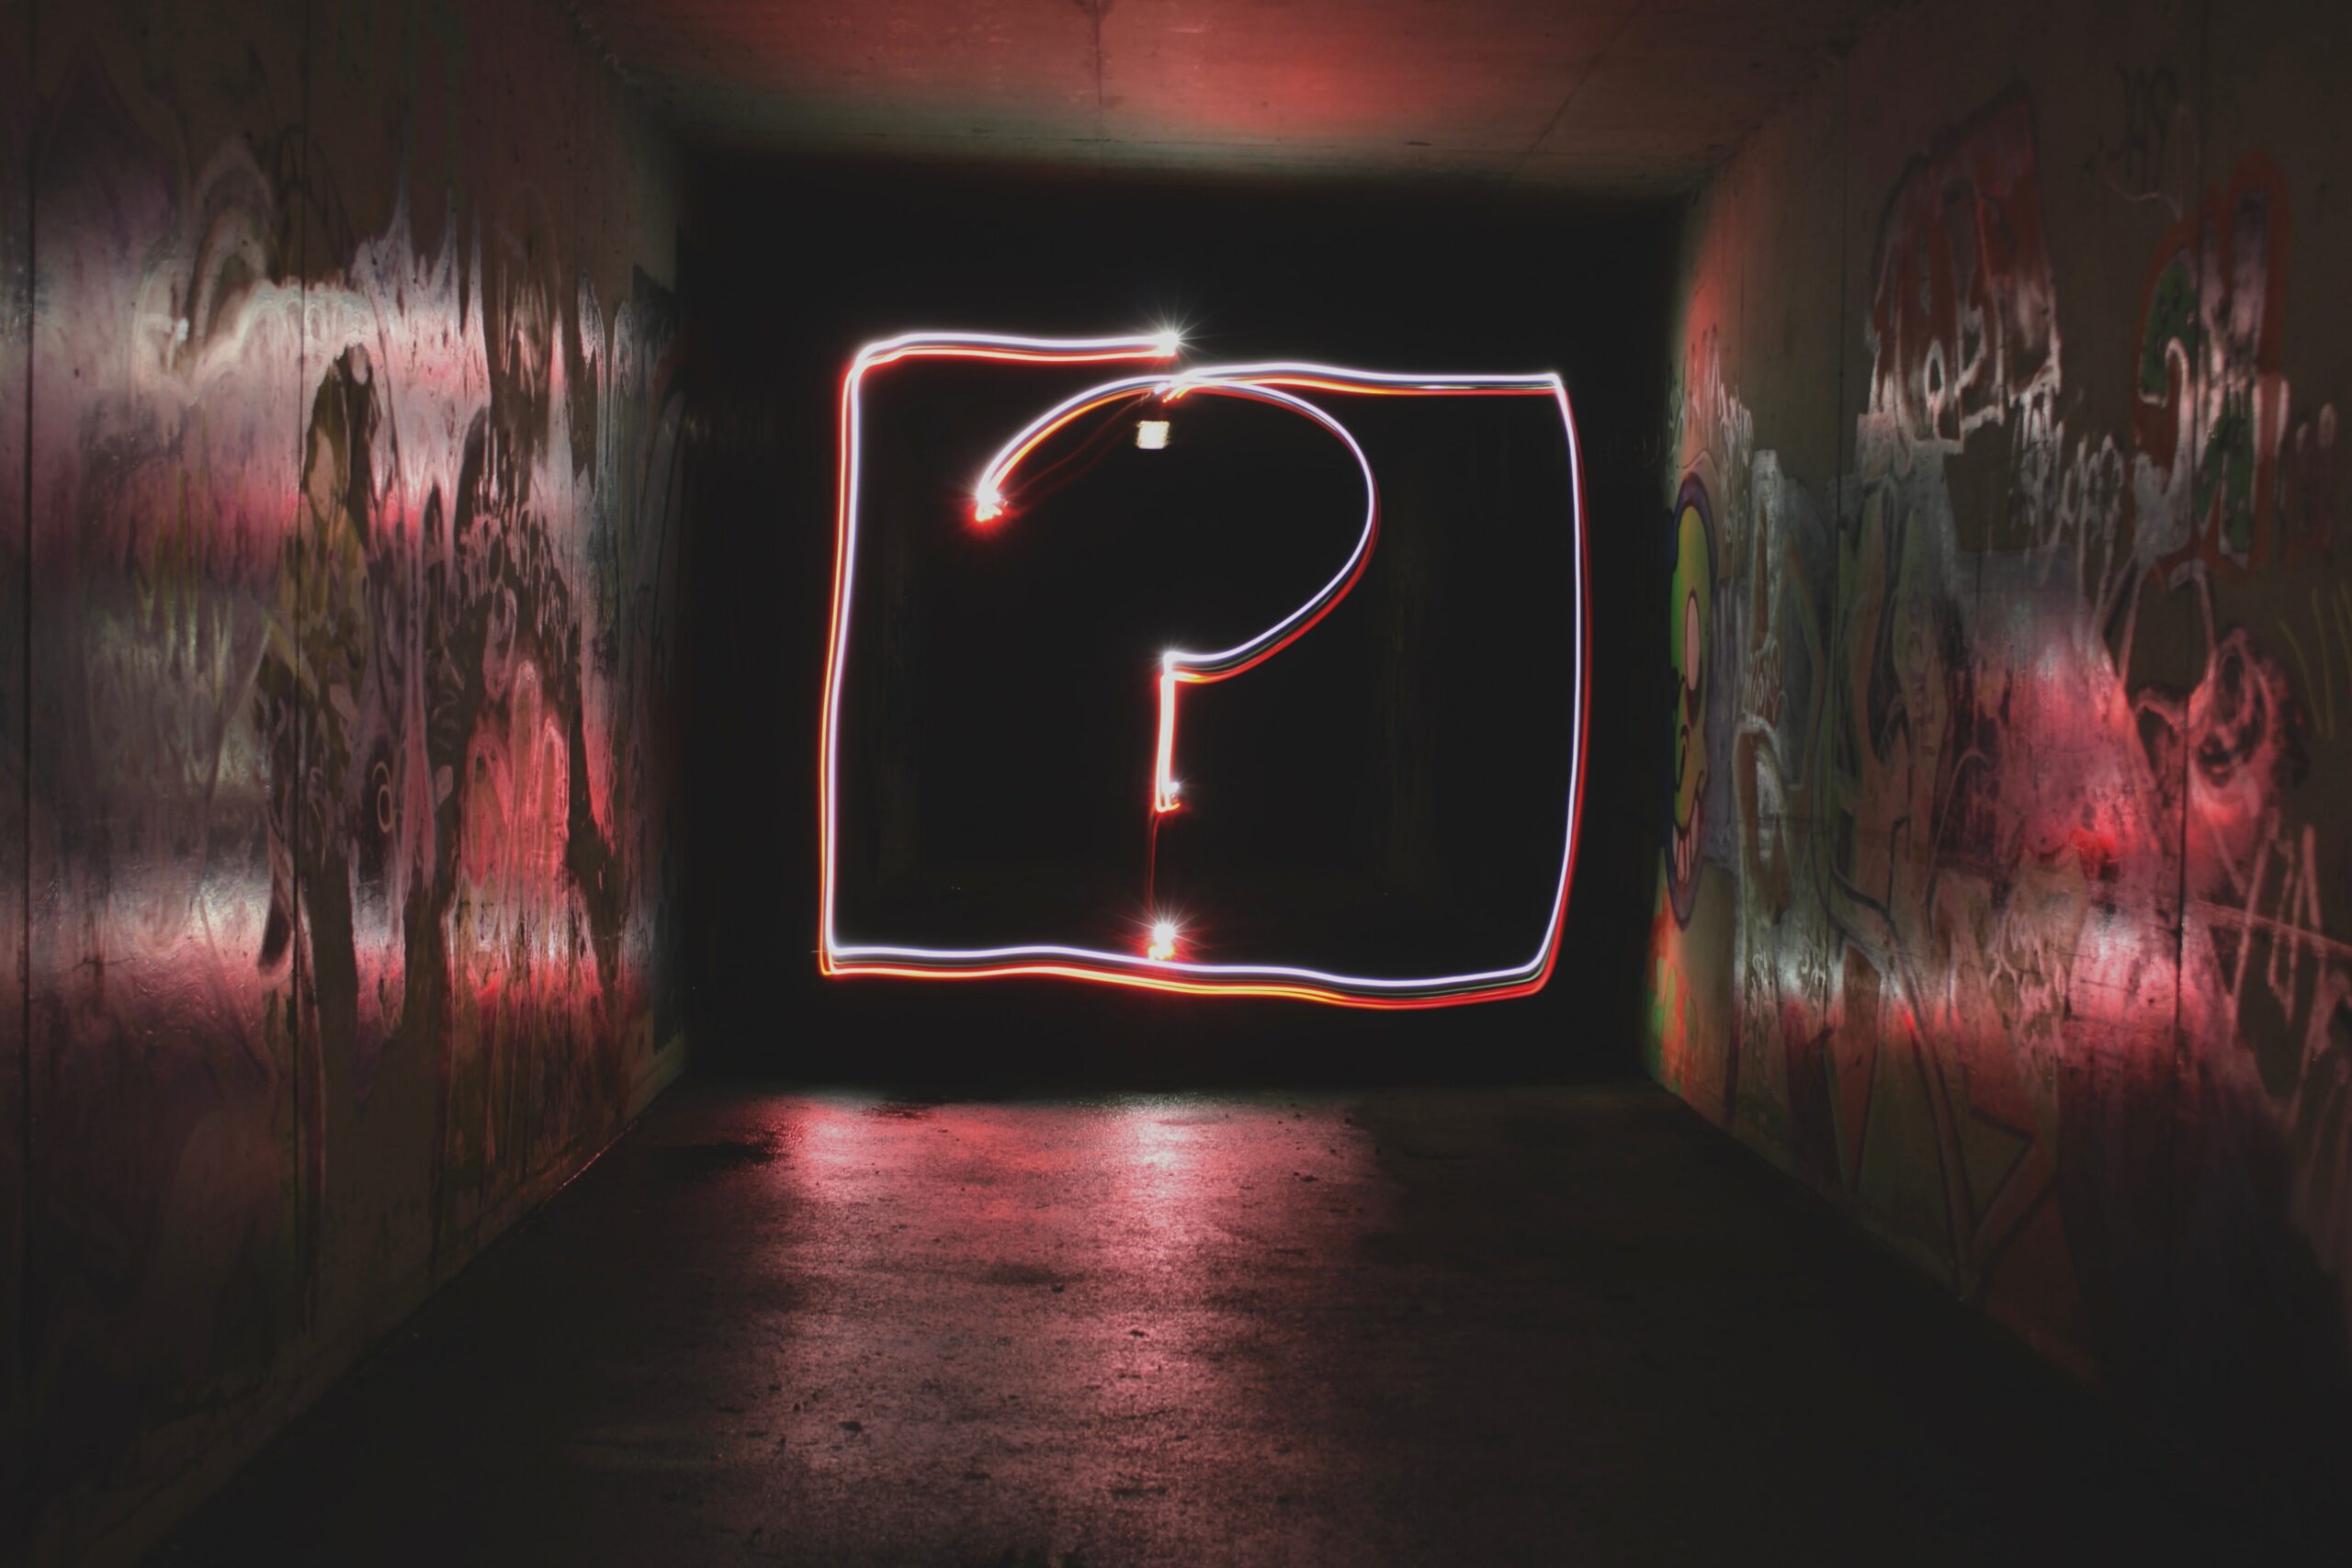 Neon sign of a question mark.